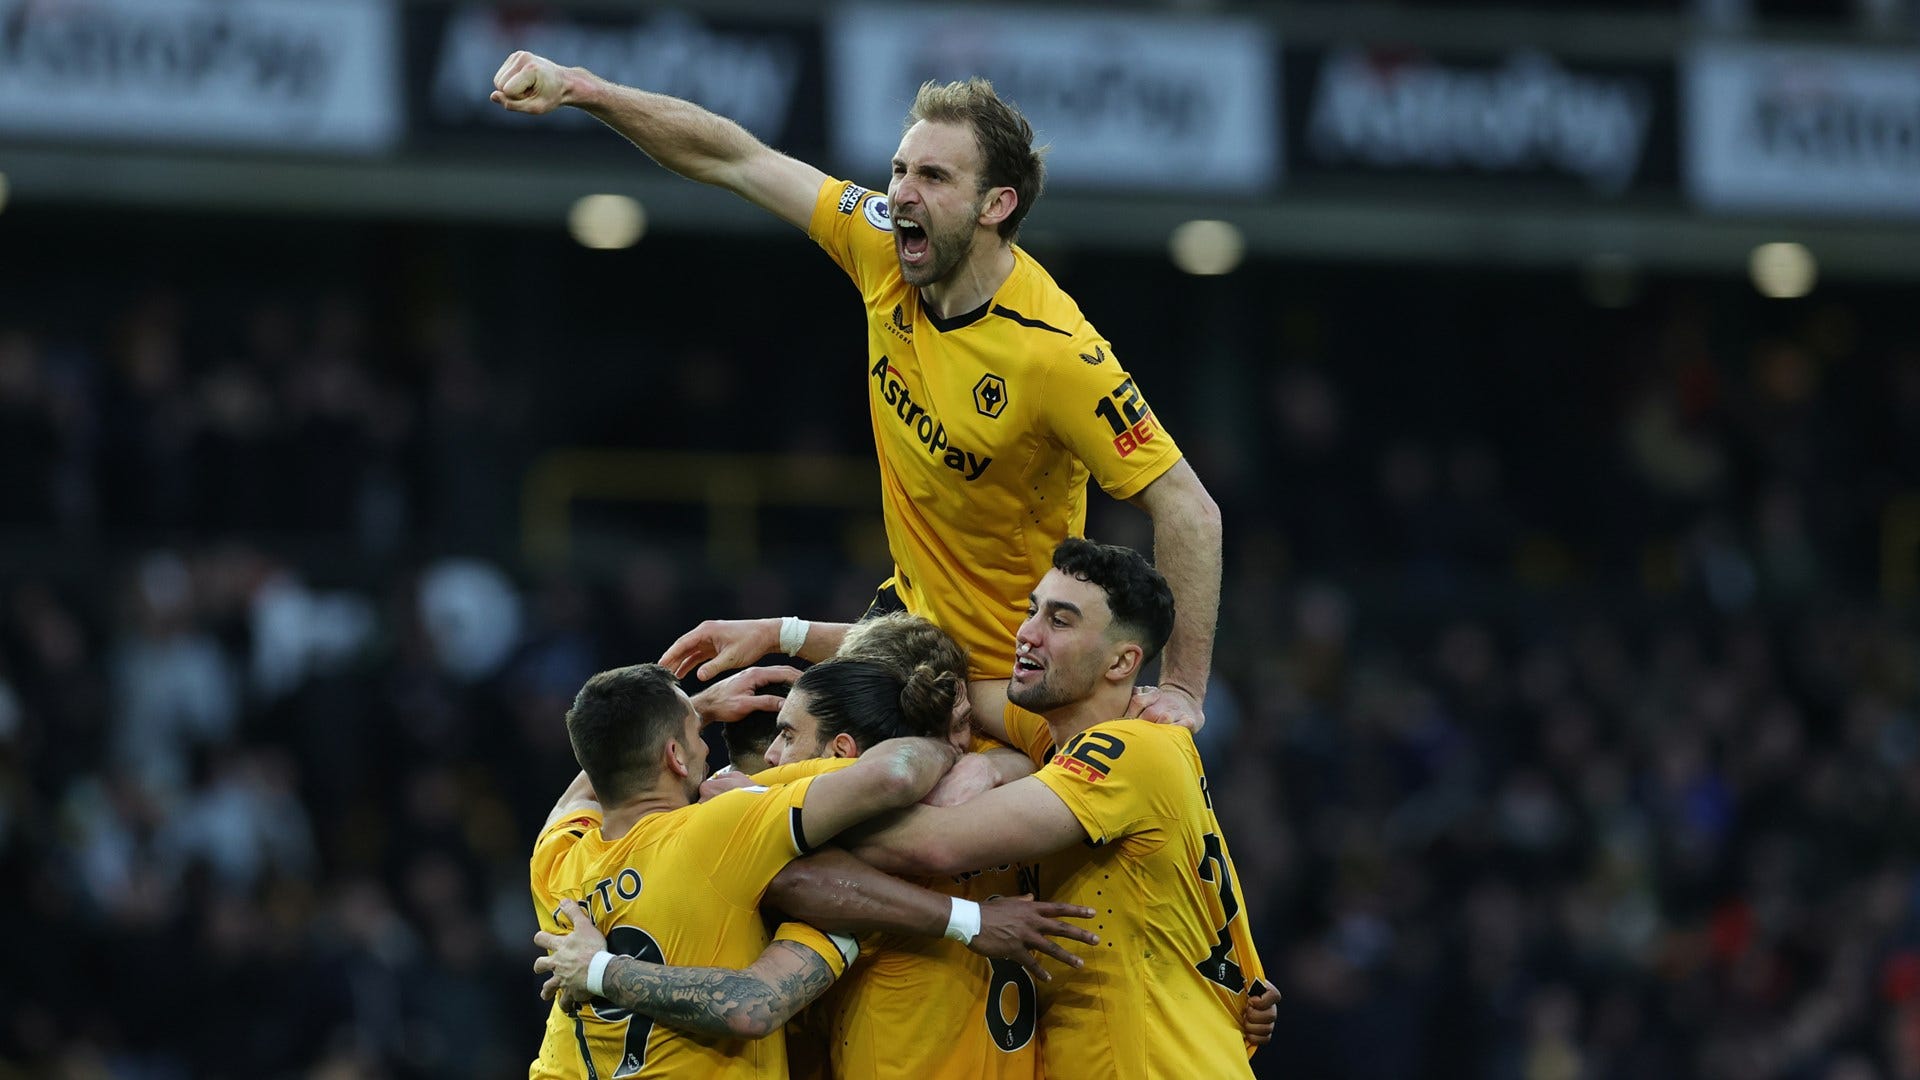 Wolves vs Leeds United Live stream, TV channel, kick-off time and where to watch Goal